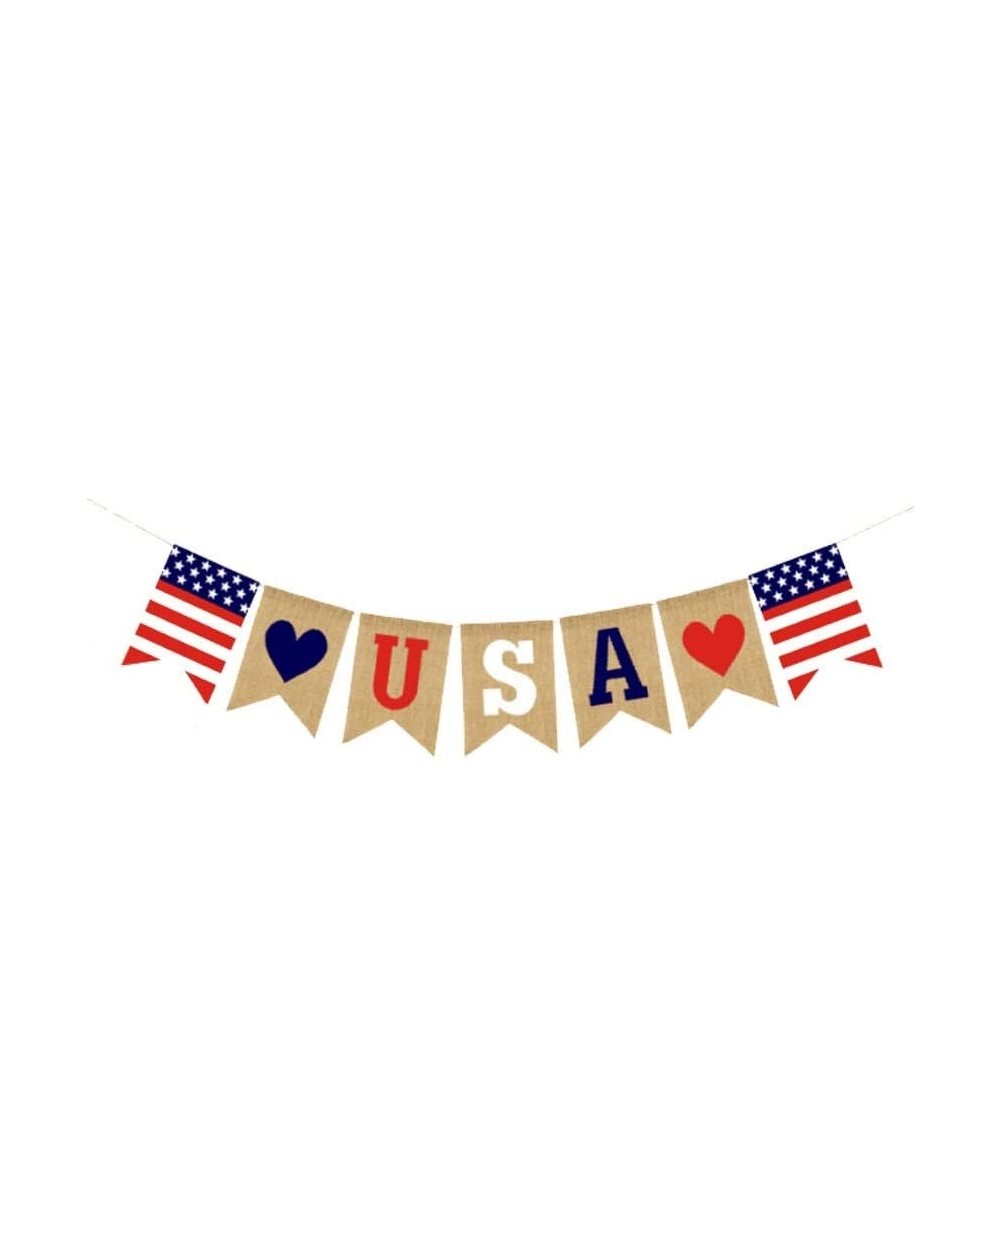 Banners 4th of July Banner USA Letter Banner Bunting America Independence Day Garland Bunting Banner Memorial Day Veterans Da...